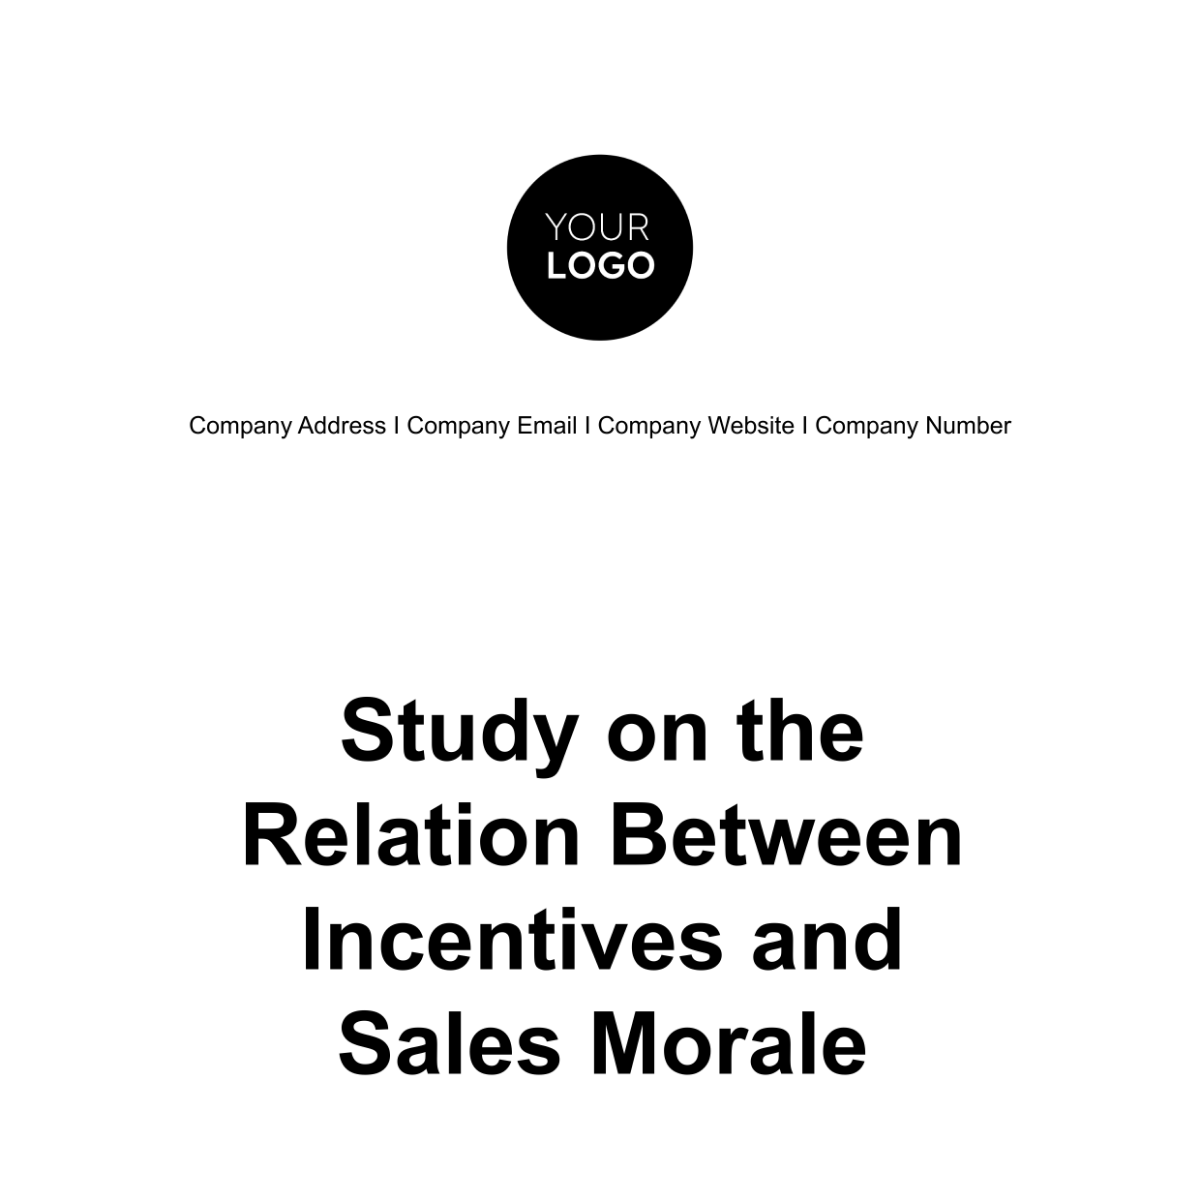 Study on the Relation Between Incentives and Sales Morale Template